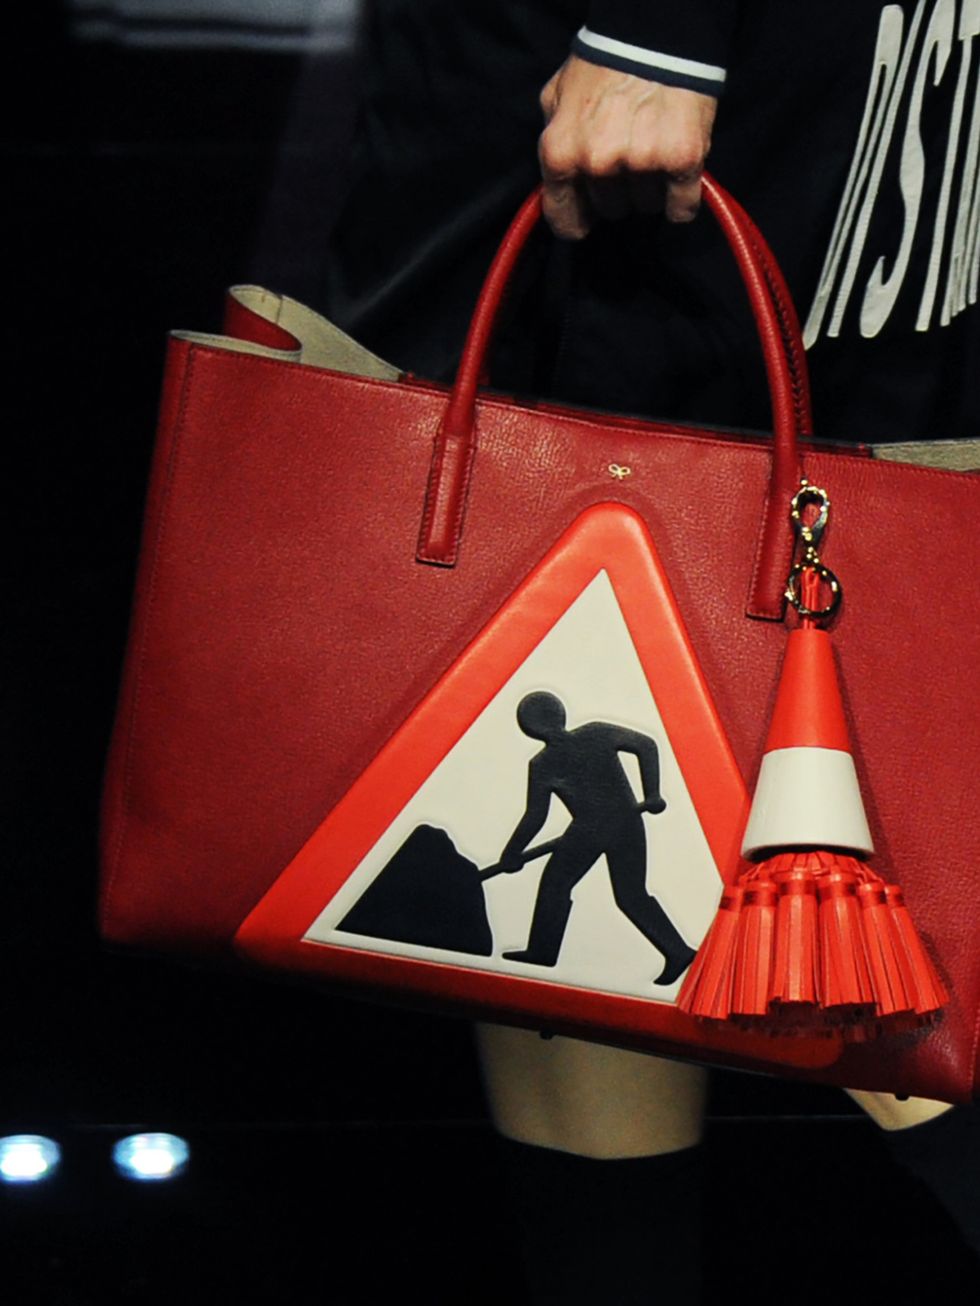 Red, Carmine, Signage, Bag, Sign, Lampshade, Coquelicot, Traffic sign, Shopping bag, 